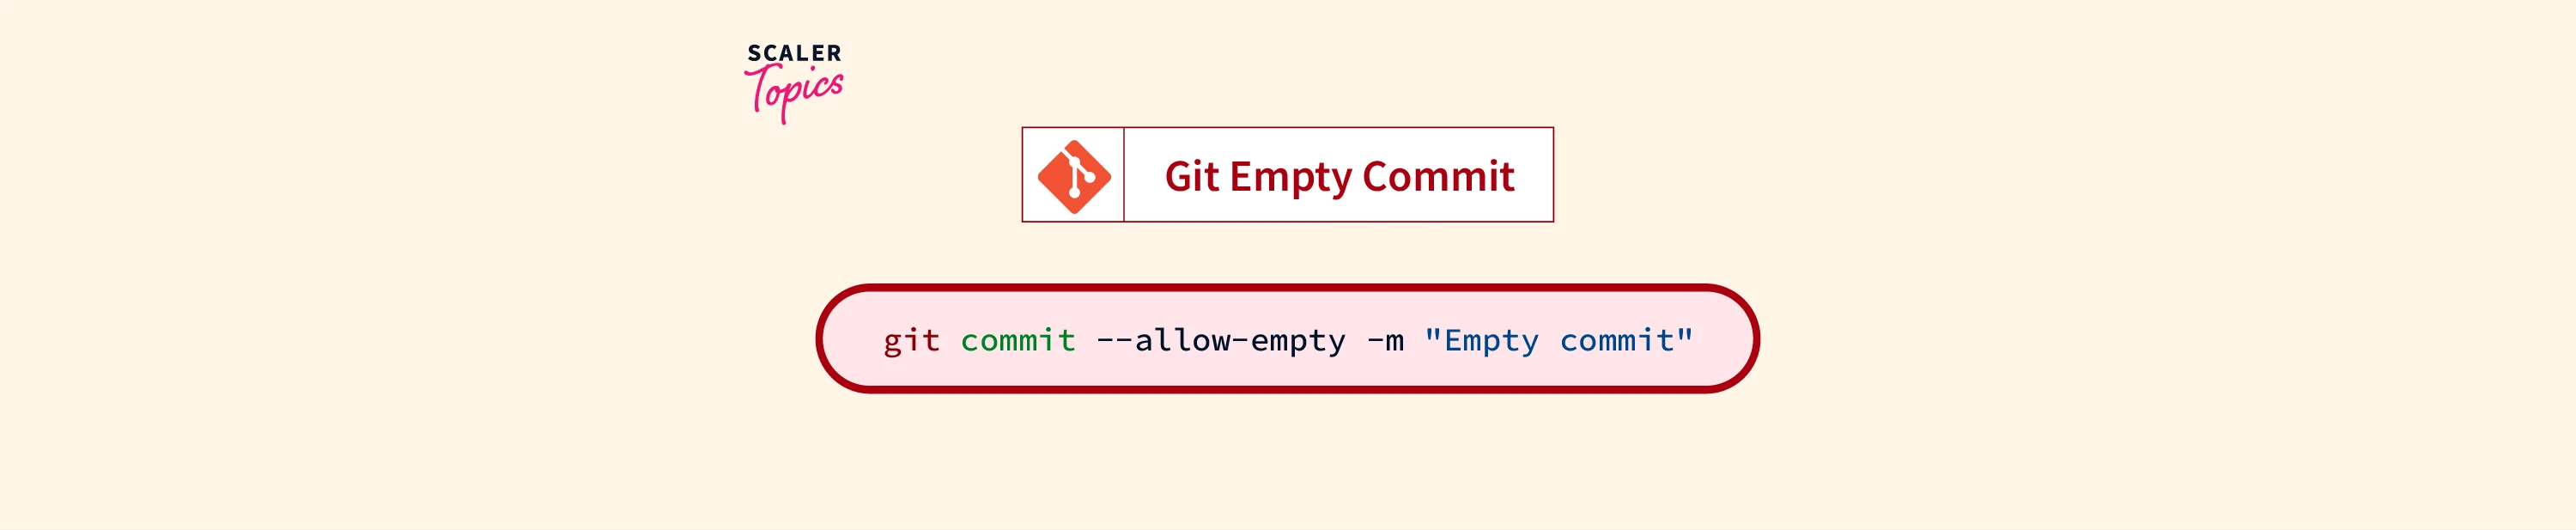 How To Push An Empty Commit In Git? - Scaler Topics